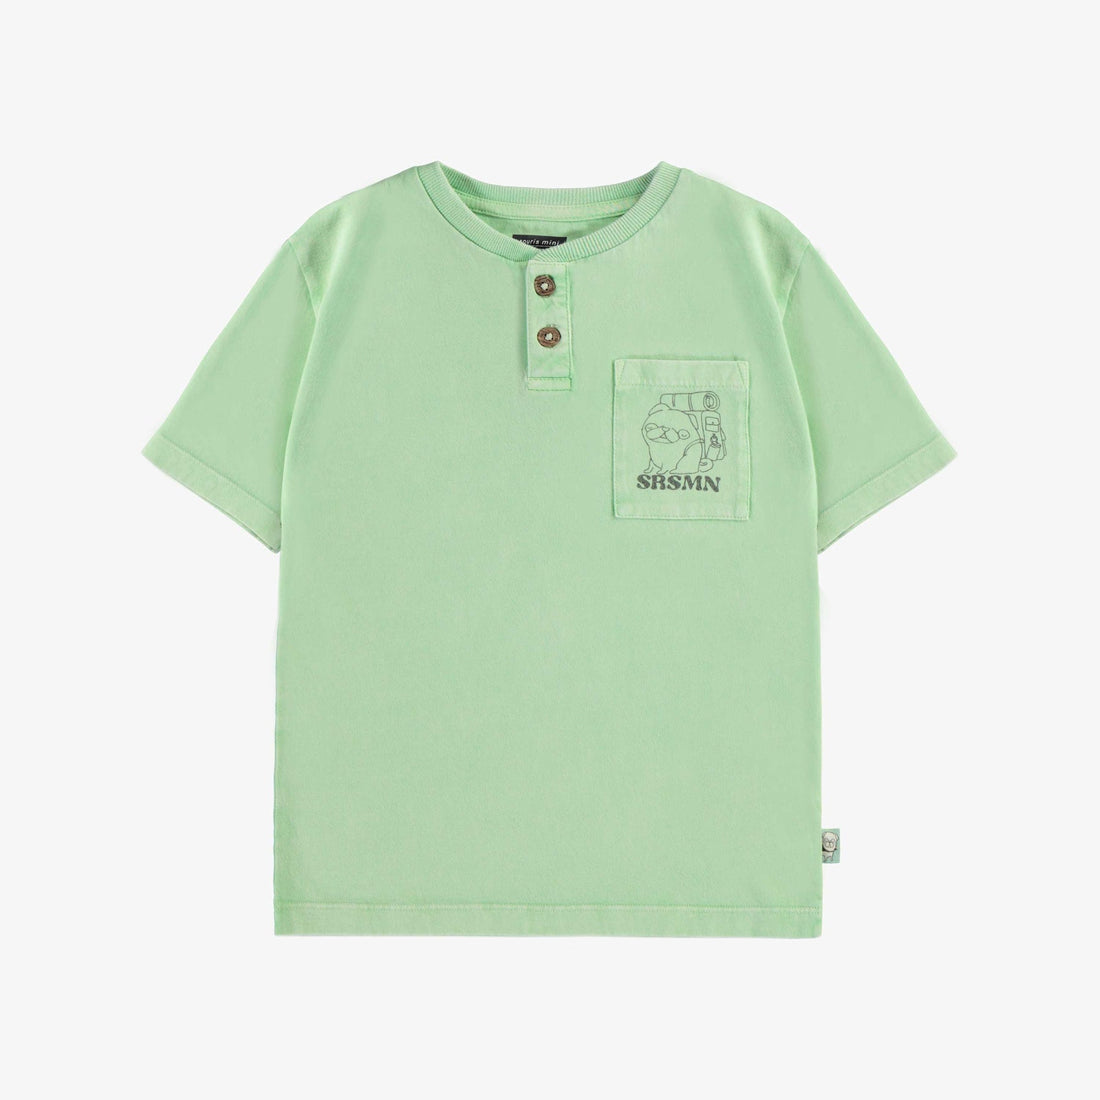 GREEN SHORT SLEEVES T-SHIRT WITH A POCKET AND AN ILLUSTRATION, CHILD